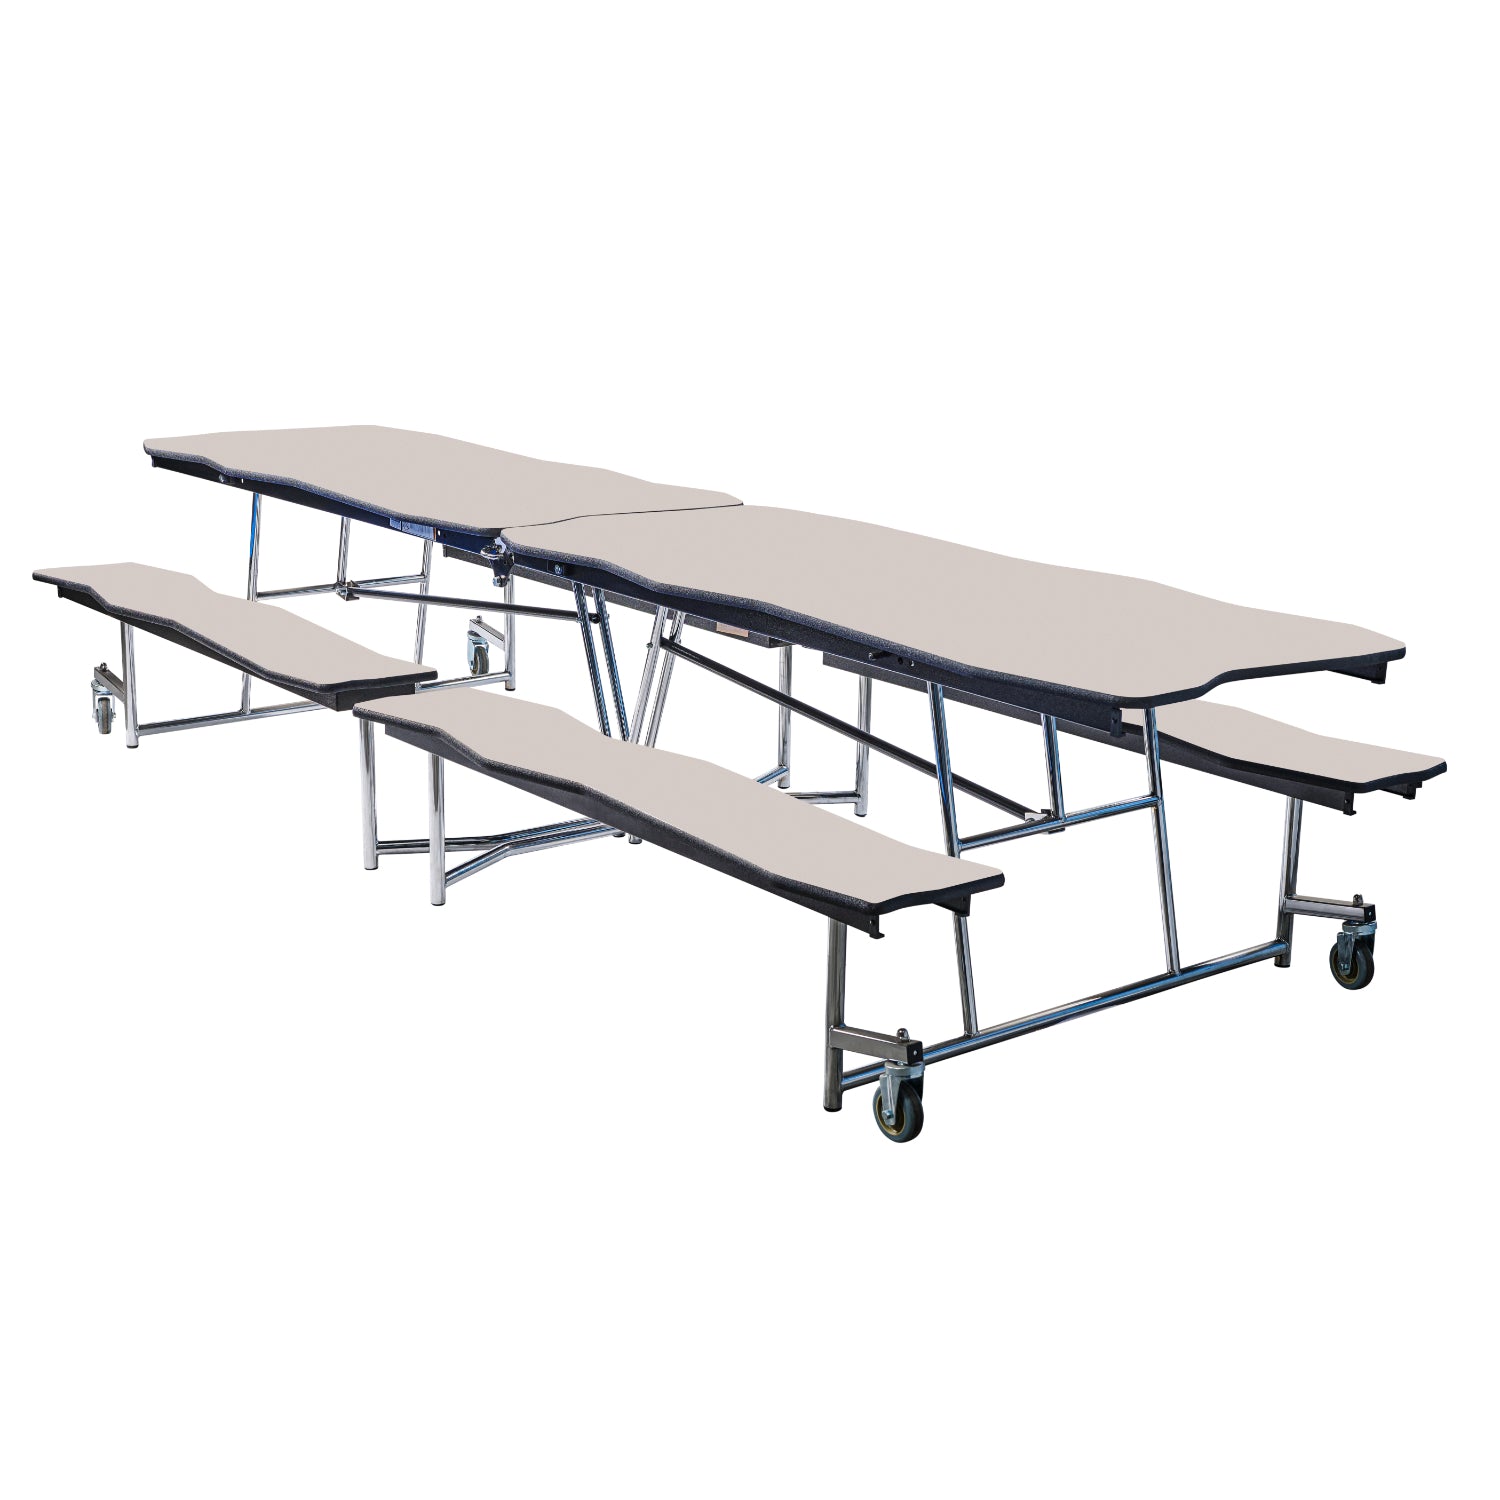 Mobile Cafeteria Table with Benches, 12' Bedrock, Plywood Core, Vinyl T-Mold Edge, Chrome Frame